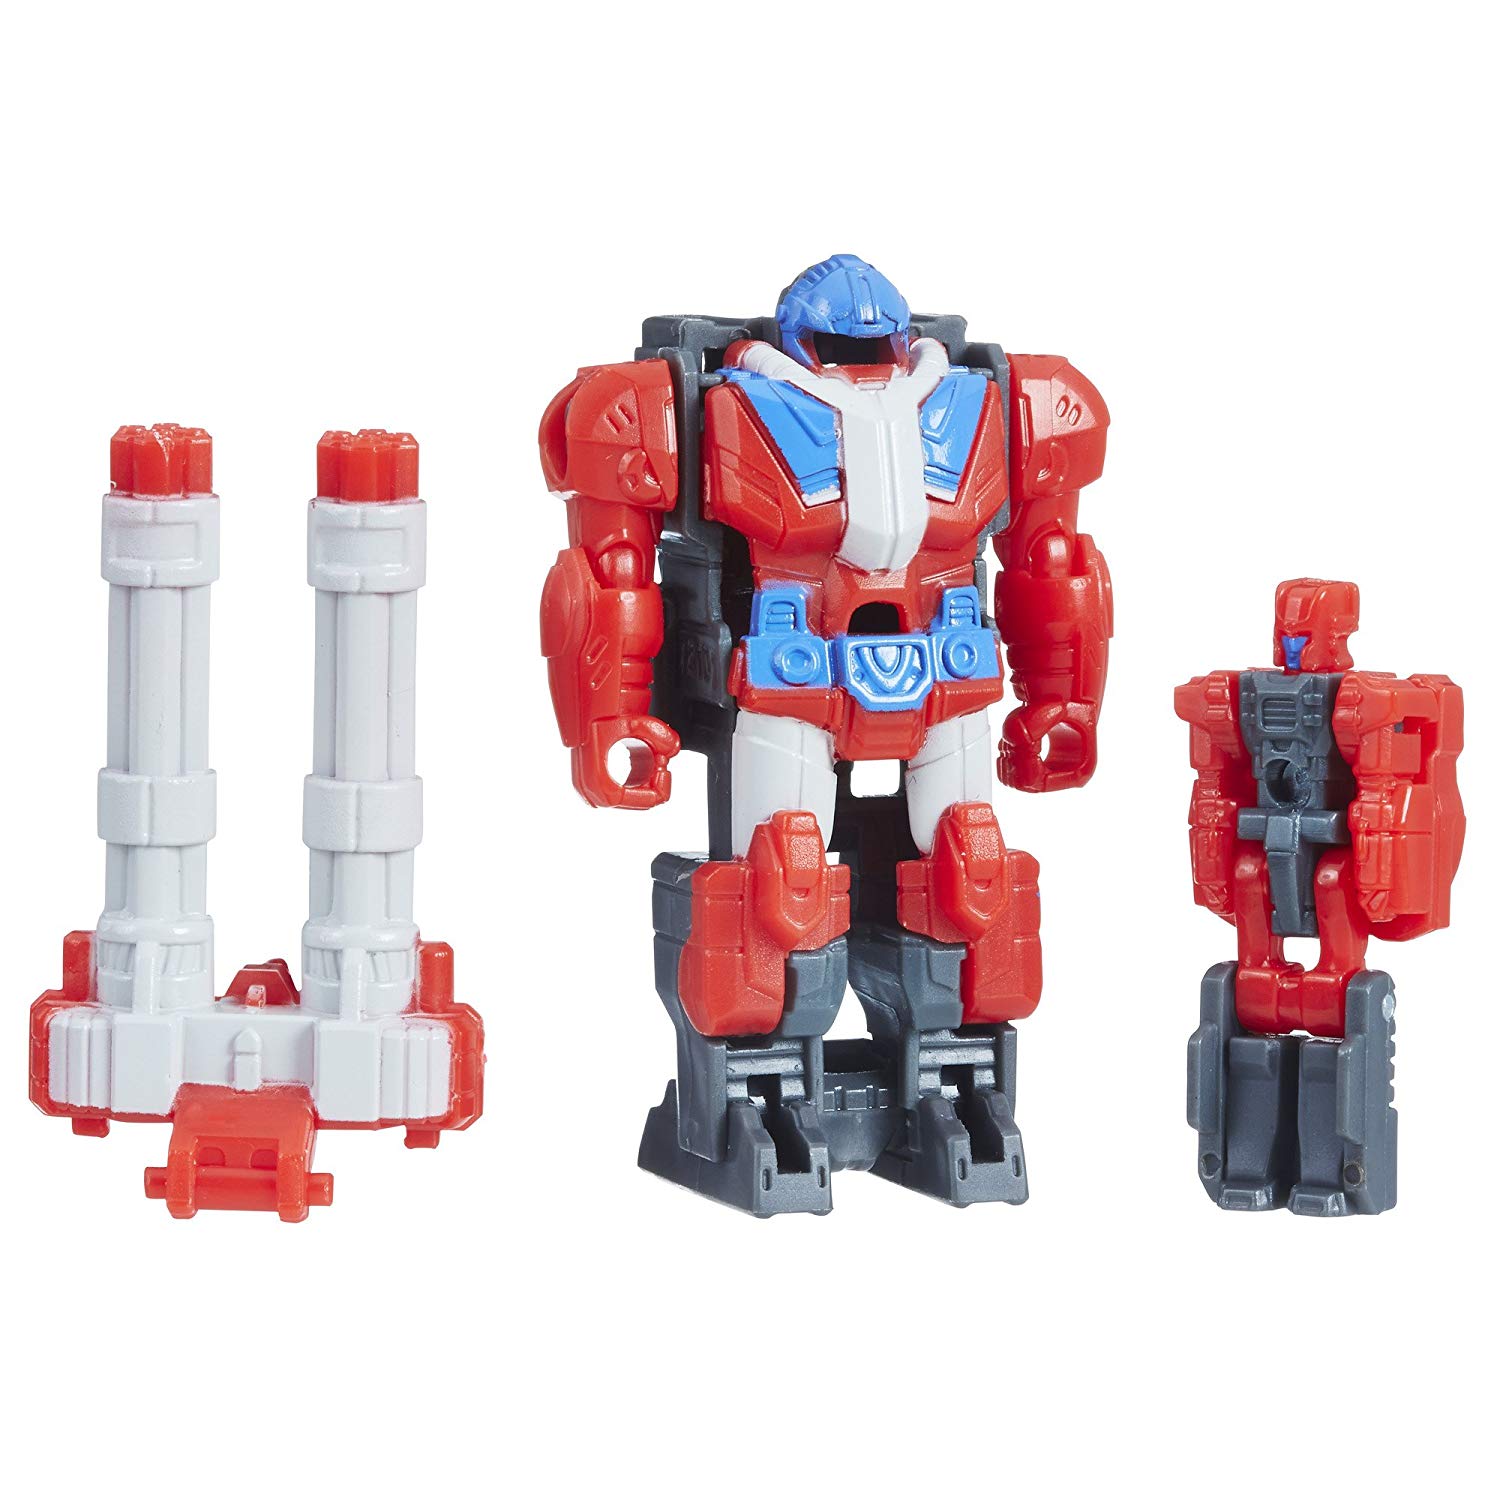 Transformers Generations Power of the Prime Master Micronus Figure